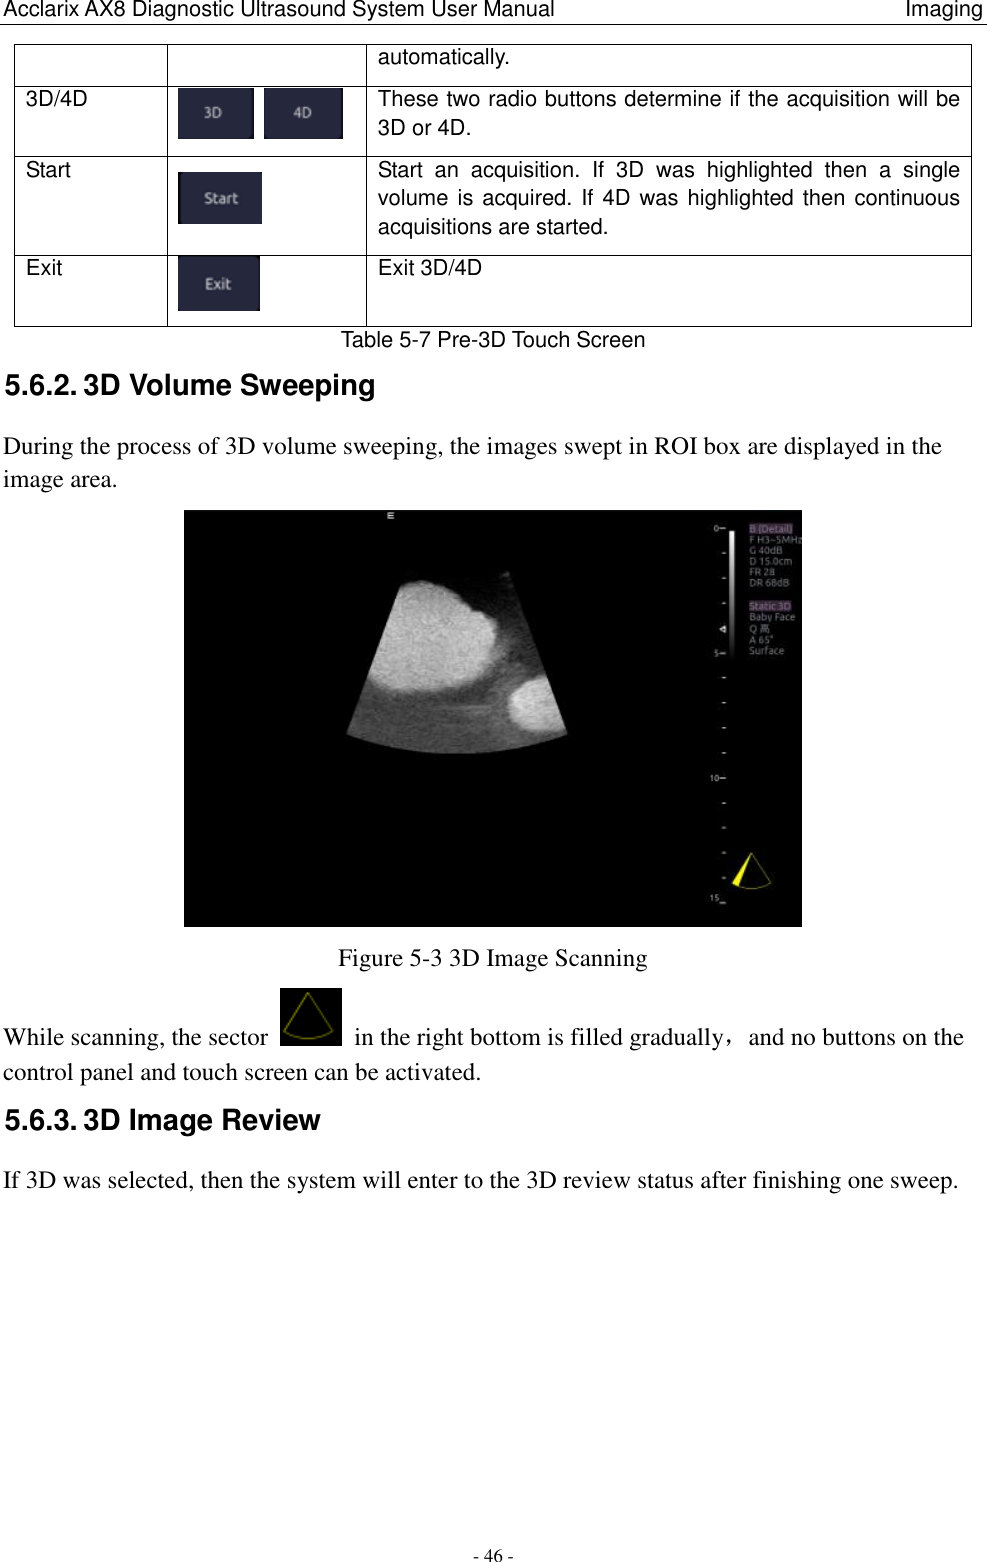 Acclarix AX8 Diagnostic Ultrasound System User Manual                                                                Imaging - 46 - Table 5-7 Pre-3D Touch Screen 5.6.2. 3D Volume Sweeping During the process of 3D volume sweeping, the images swept in ROI box are displayed in the image area.  Figure 5-3 3D Image Scanning While scanning, the sector    in the right bottom is filled gradually，and no buttons on the control panel and touch screen can be activated. 5.6.3. 3D Image Review If 3D was selected, then the system will enter to the 3D review status after finishing one sweep. automatically. 3D/4D    These two radio buttons determine if the acquisition will be 3D or 4D. Start    Start  an  acquisition.  If  3D  was  highlighted  then  a  single volume is acquired. If 4D was highlighted then continuous acquisitions are started. Exit  Exit 3D/4D 